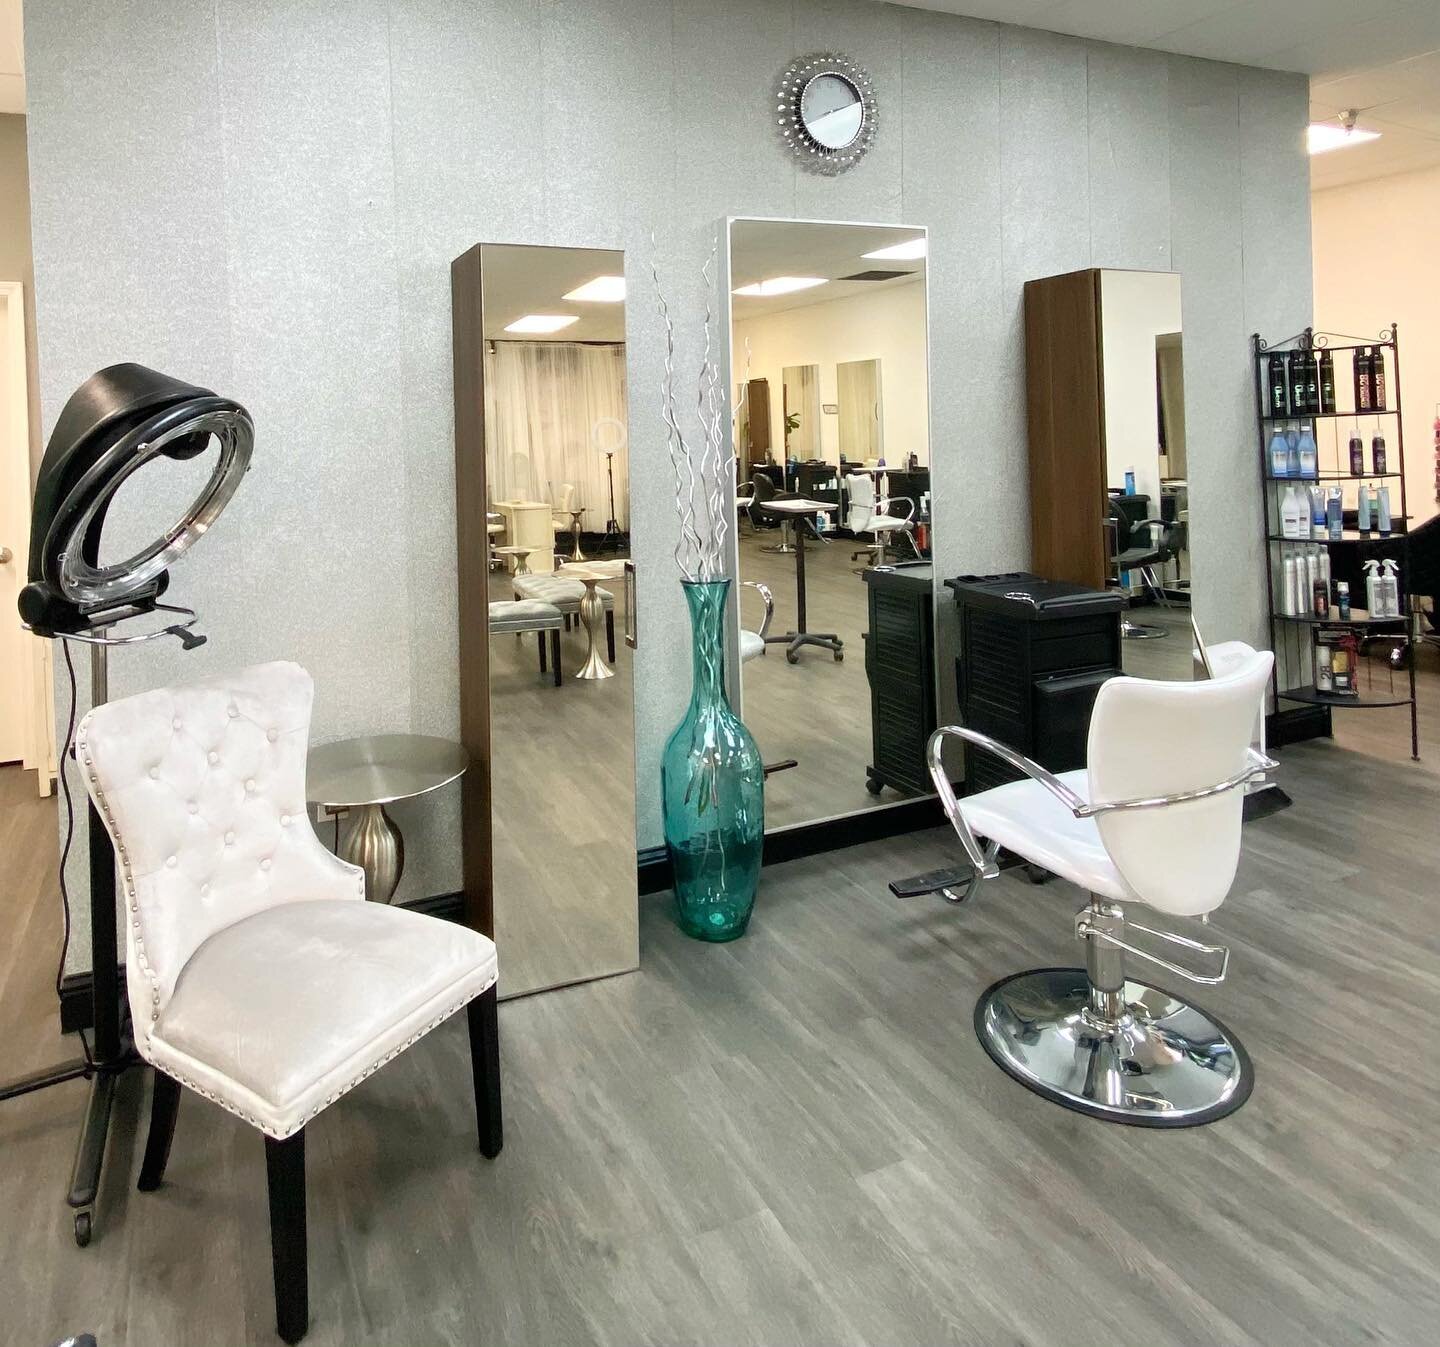 This year we have had many changes. Majority of our staff has stayed the same, but we have some new faces; as well as, have added some new services. We also have a new sister salon @europeanhair_salon located in Sacramento on Fulton Avenue. 

*
*
*
#